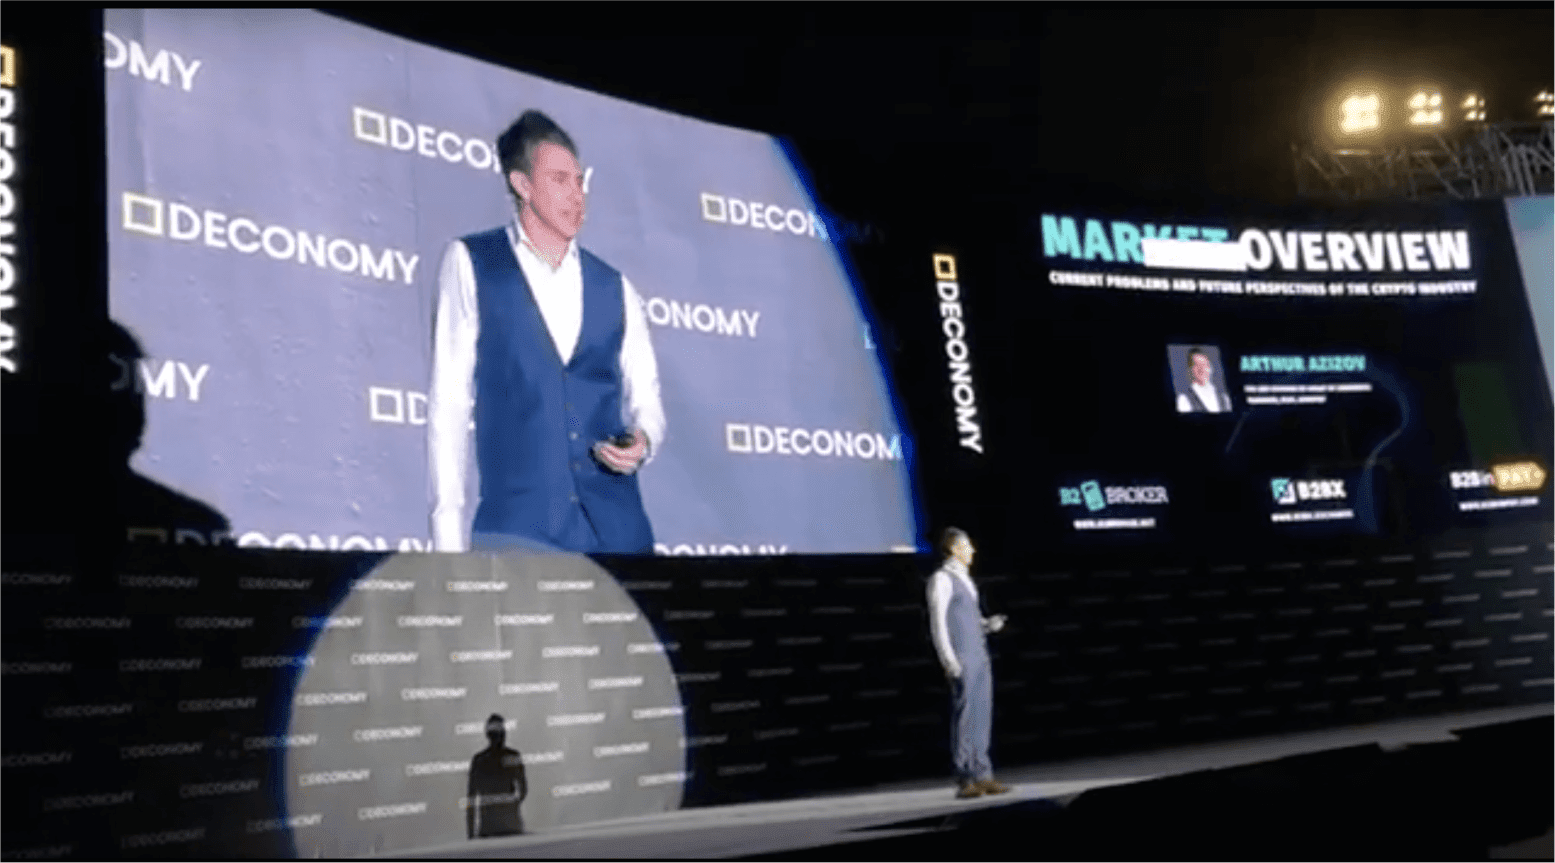 Deconomy 2019 - B2Broker's CEO with Market Overview